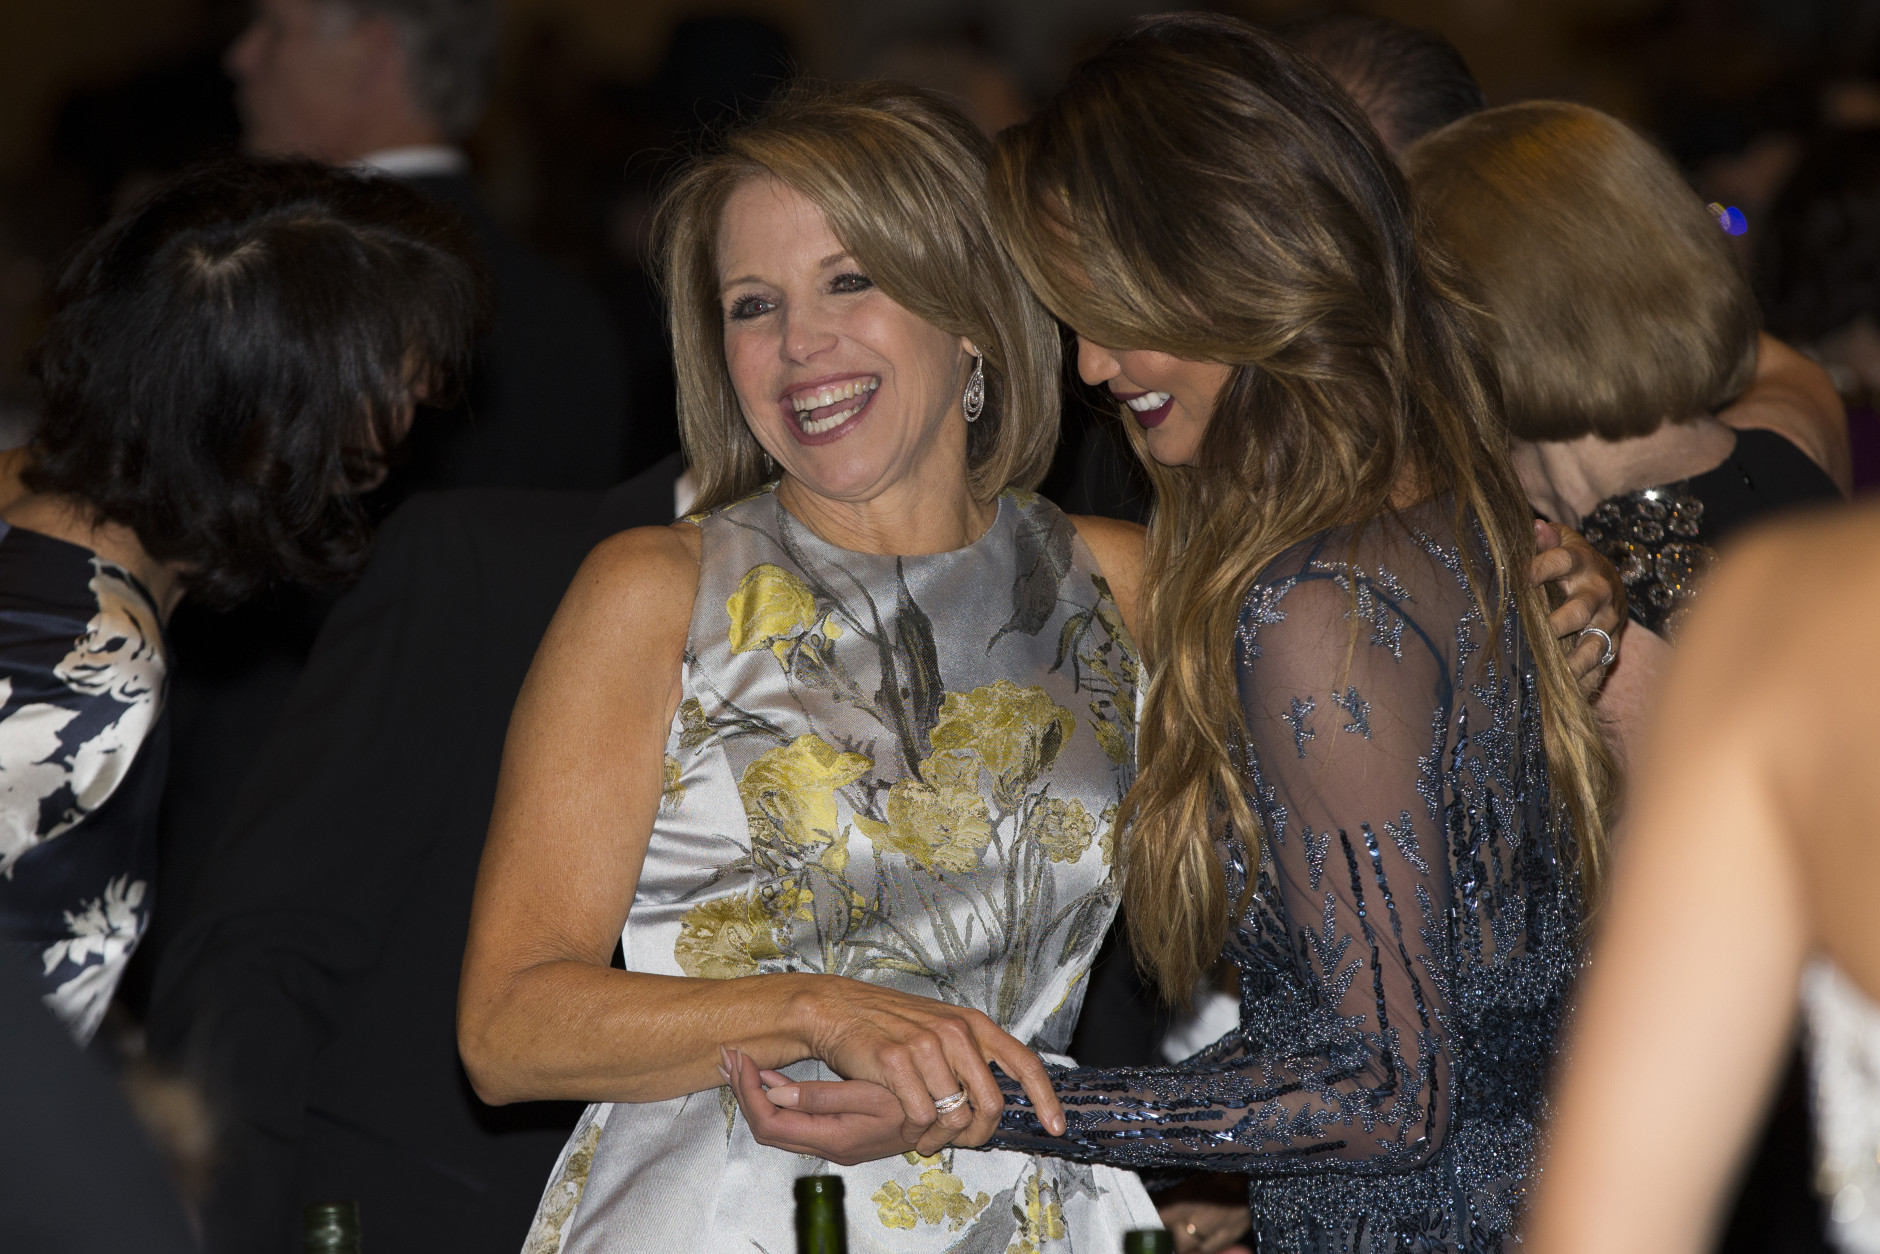 News personality Katie Couric, left, and model Chrissy Teigen mingle during the White House Correspondents' Association dinner at the Washington Hilton on Saturday, April 25, 2015, in Washington. (AP Photo/Evan Vucci)